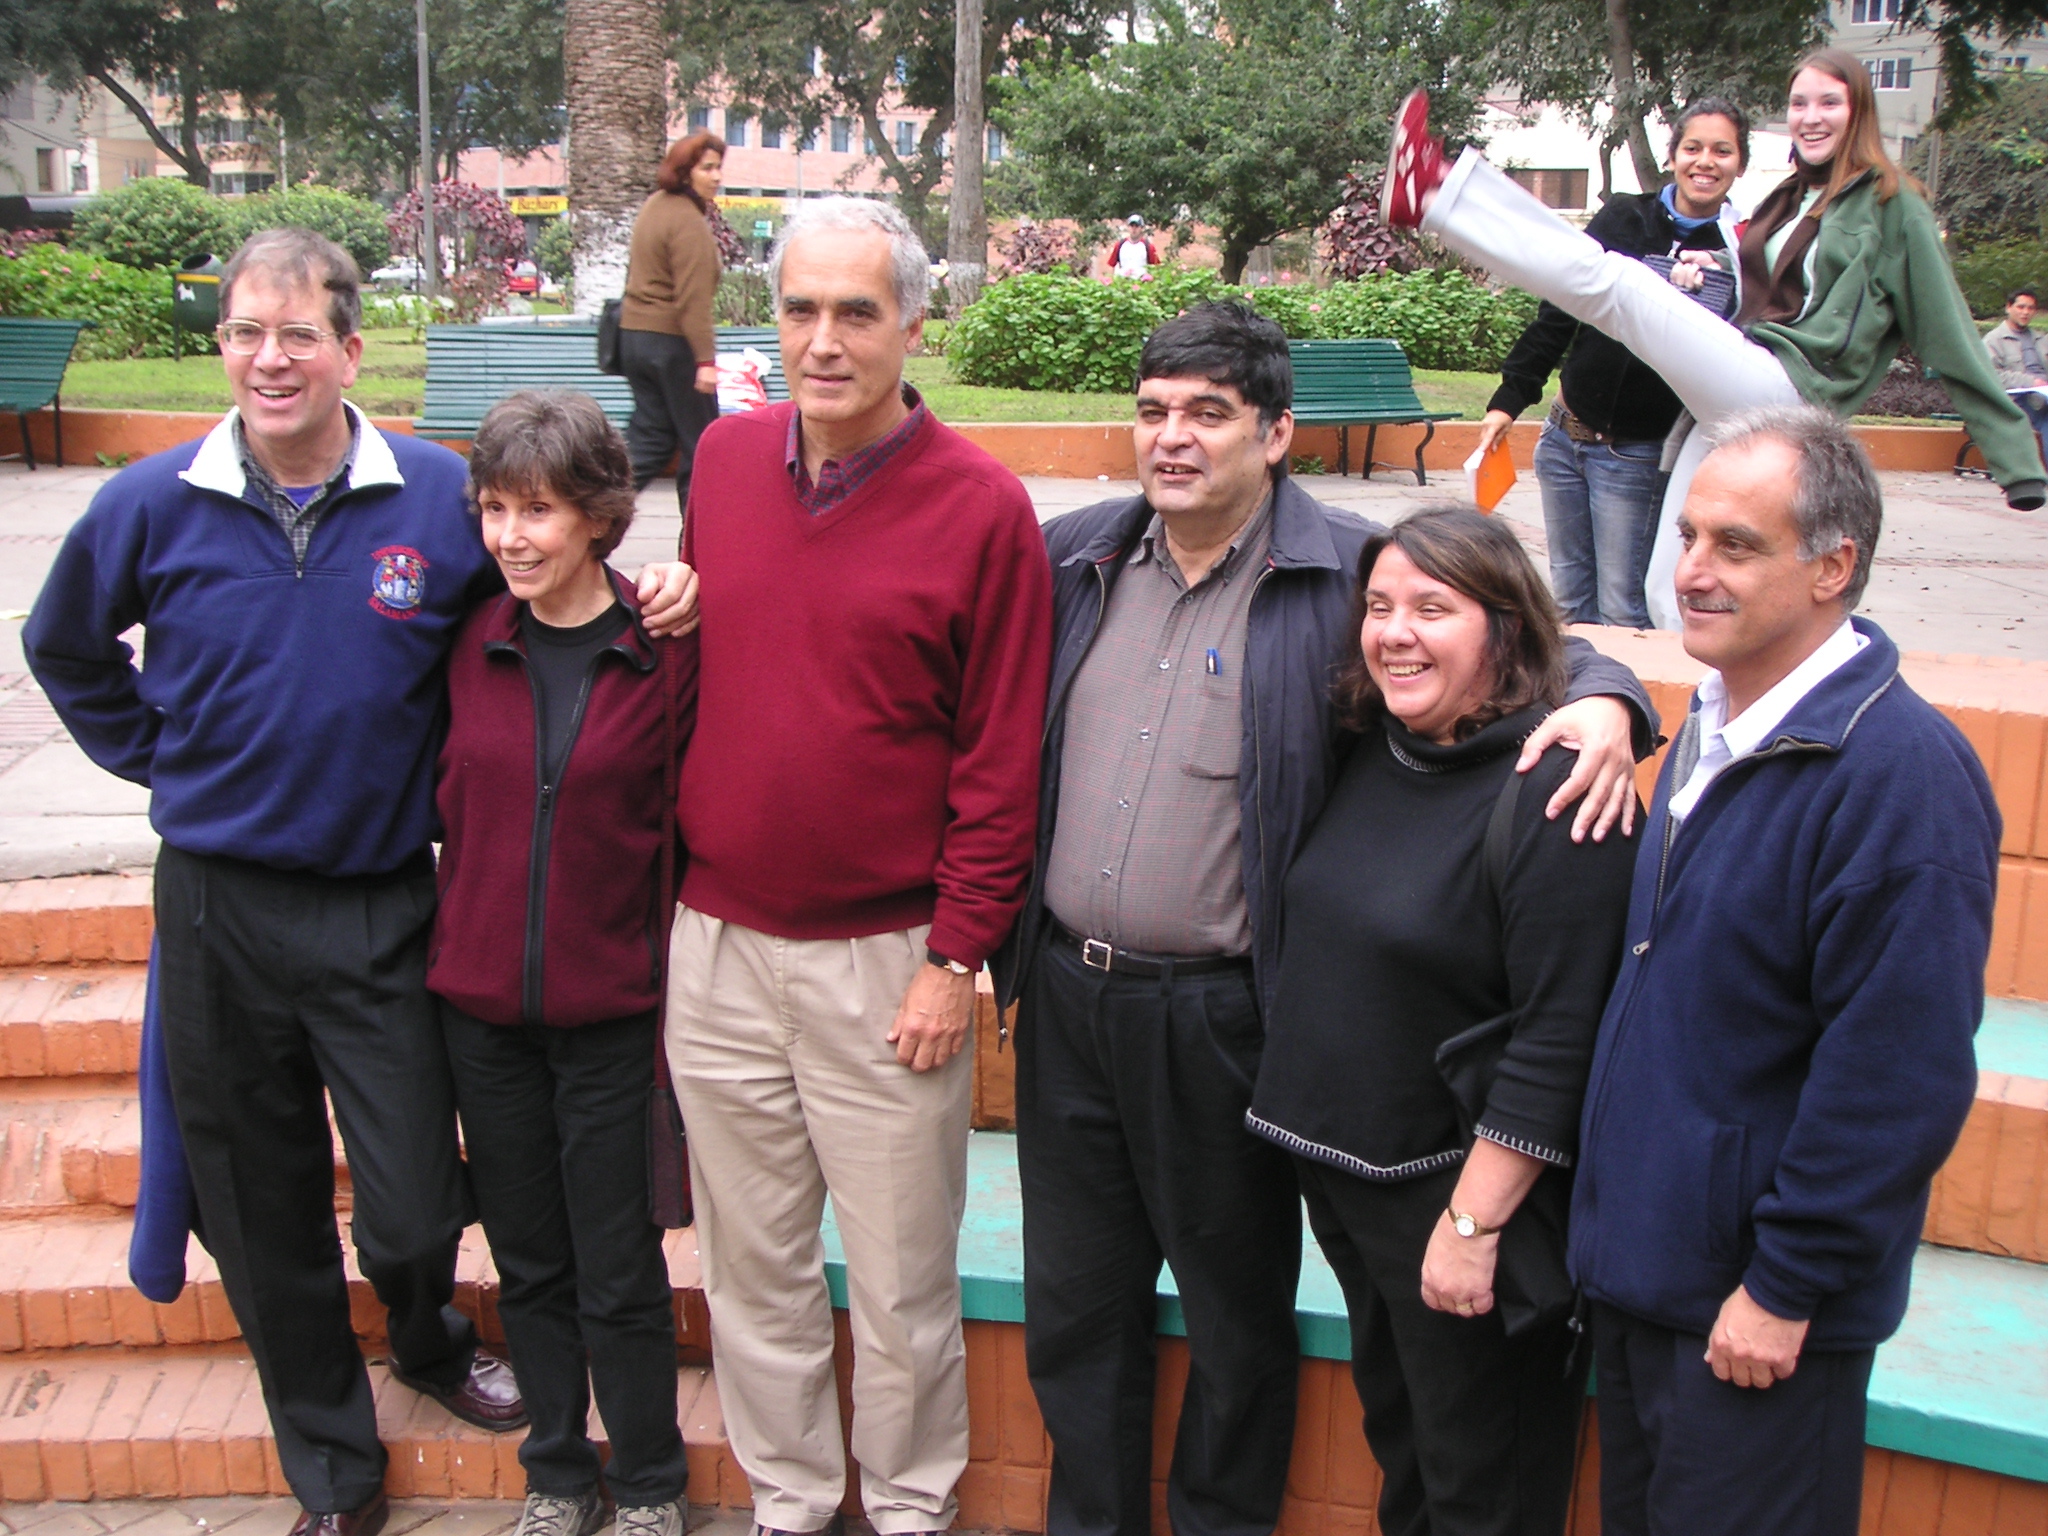 (L to R) Bob and Olga Nagel, Carlos Schwalb, Leo and Kay Villa-García, and Guillermo Castro in Parque Roosevelt. (Sylvia and Claire are having fun in the background.)